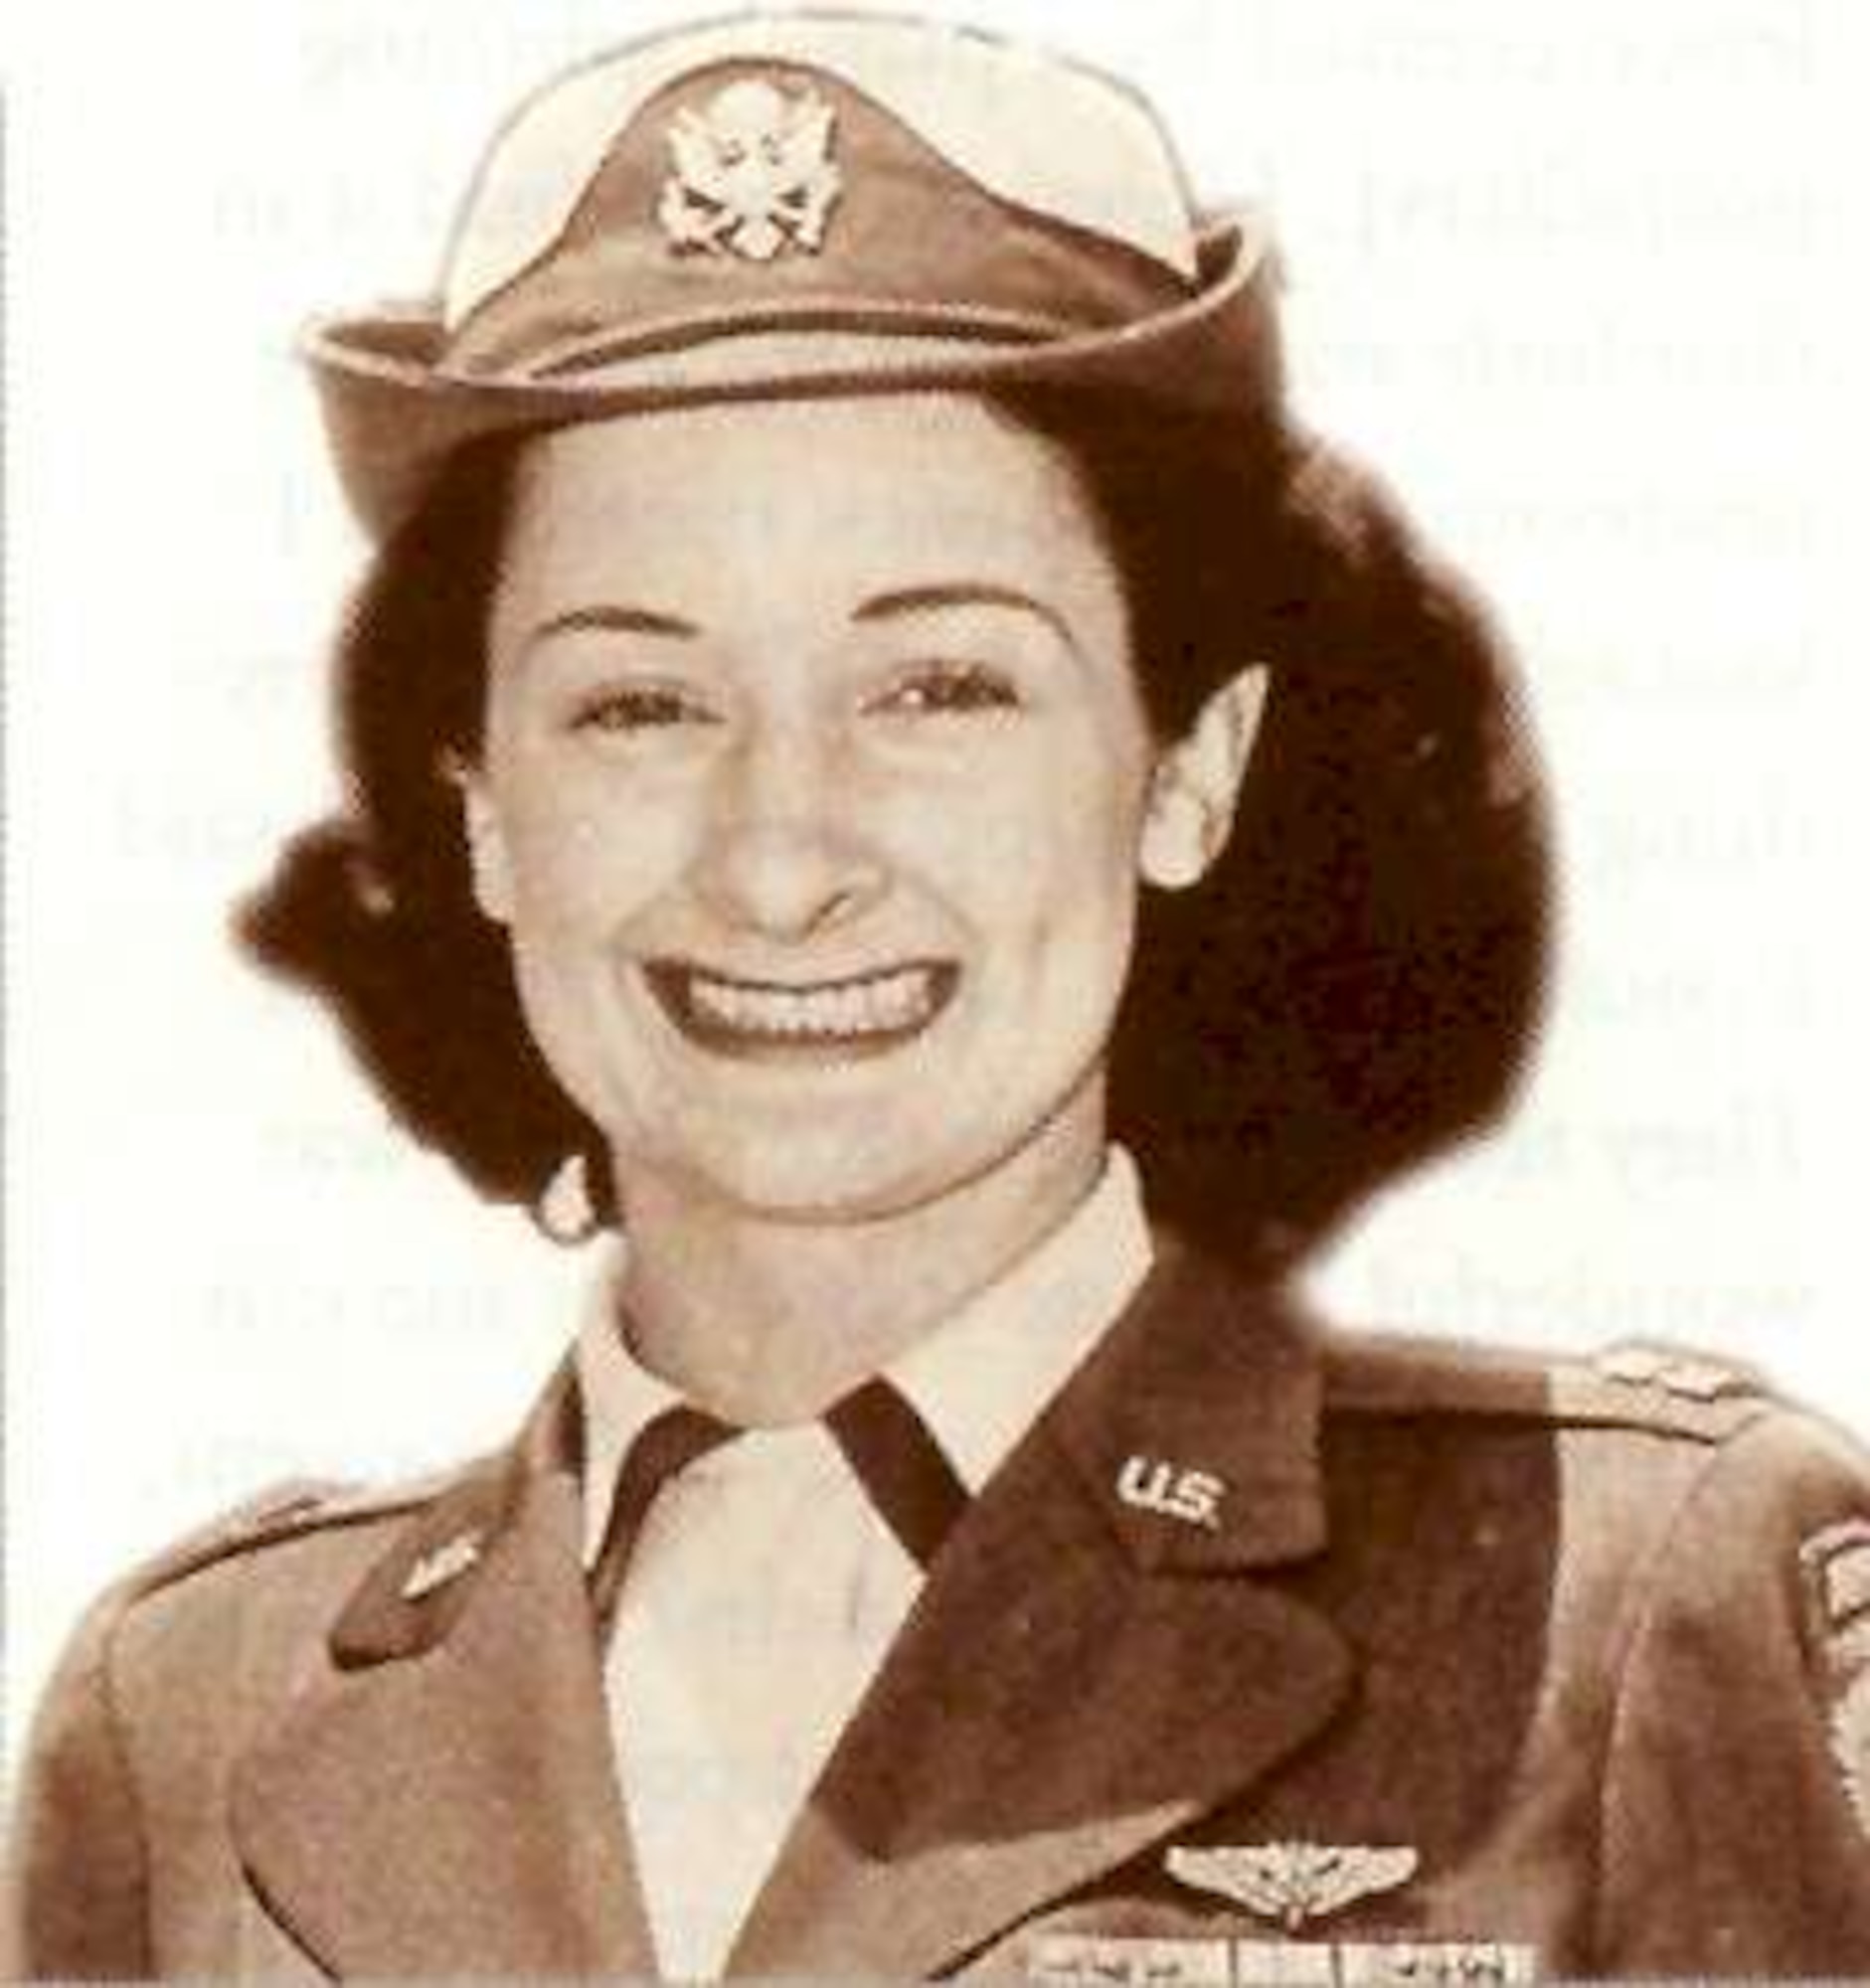 1950's -- In 1938, Lillian Kinkella Keil's mother thought her daughter might like to be one of a brand new group of women, called "stewardesses," so she advised her to go to United Airline's Oakland base and take a look. Keil, a registered nurse, had never seen an airplane and never heard of a stewardess, but one look and she was hooked. This pioneer in passenger care would later combine her two careers and become the most decorated woman in U.S. military history.